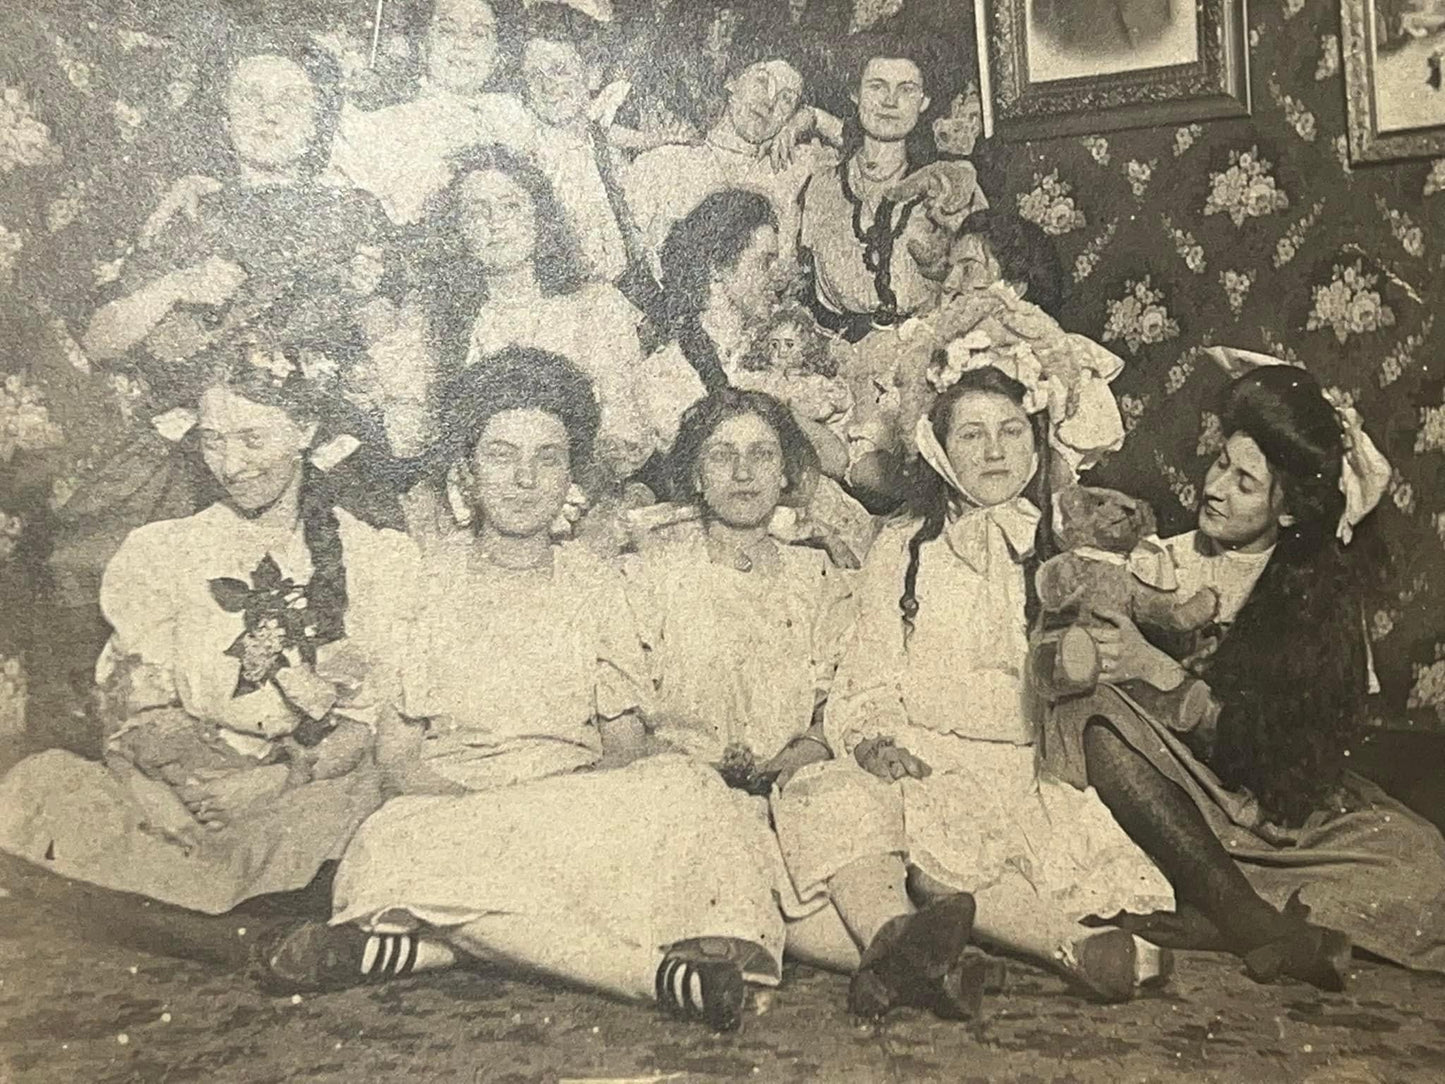 Antique Early 1900s mounted photo Theater group or sorority house dressed up fun group